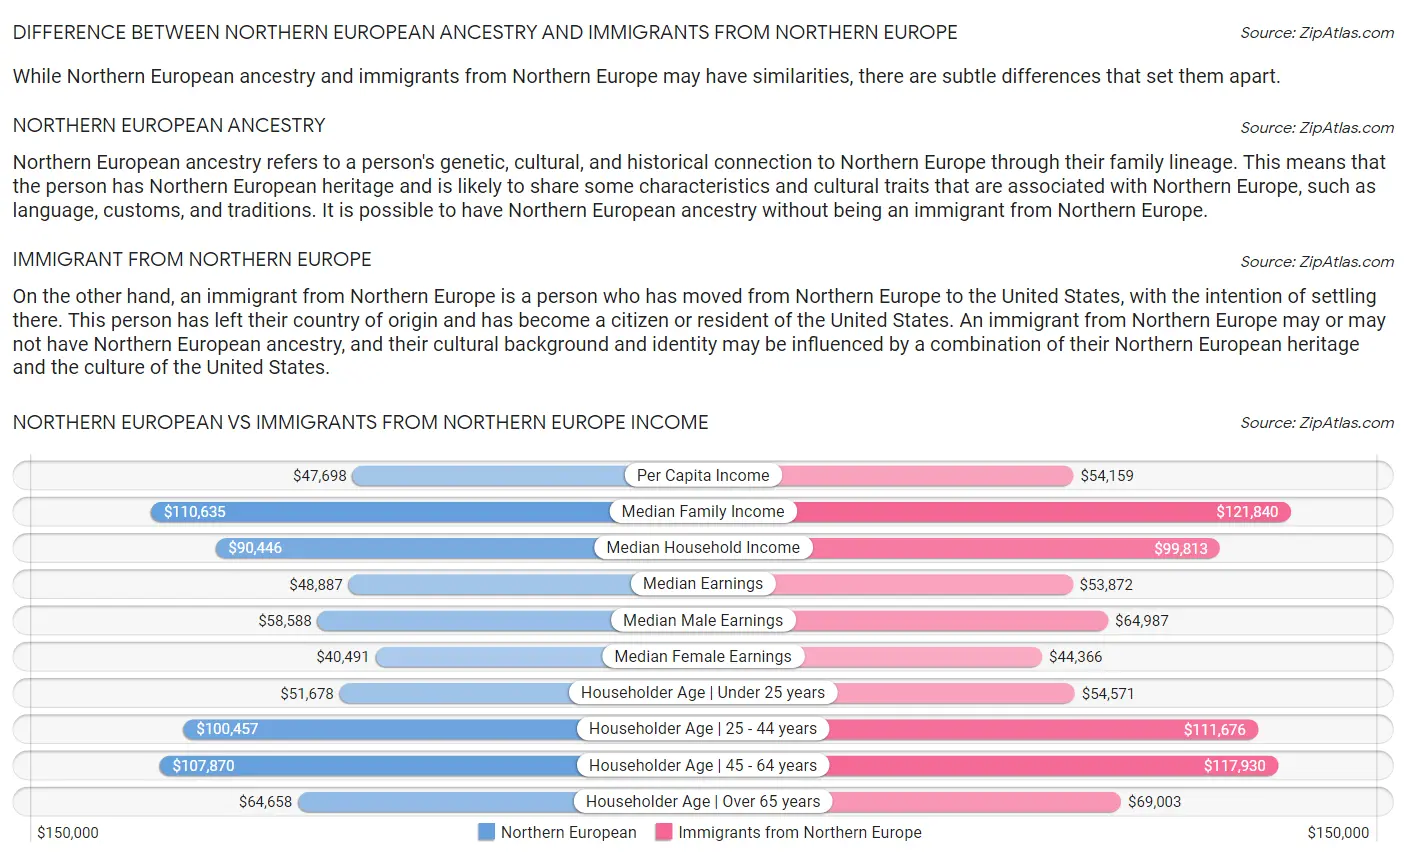 Northern European vs Immigrants from Northern Europe Income